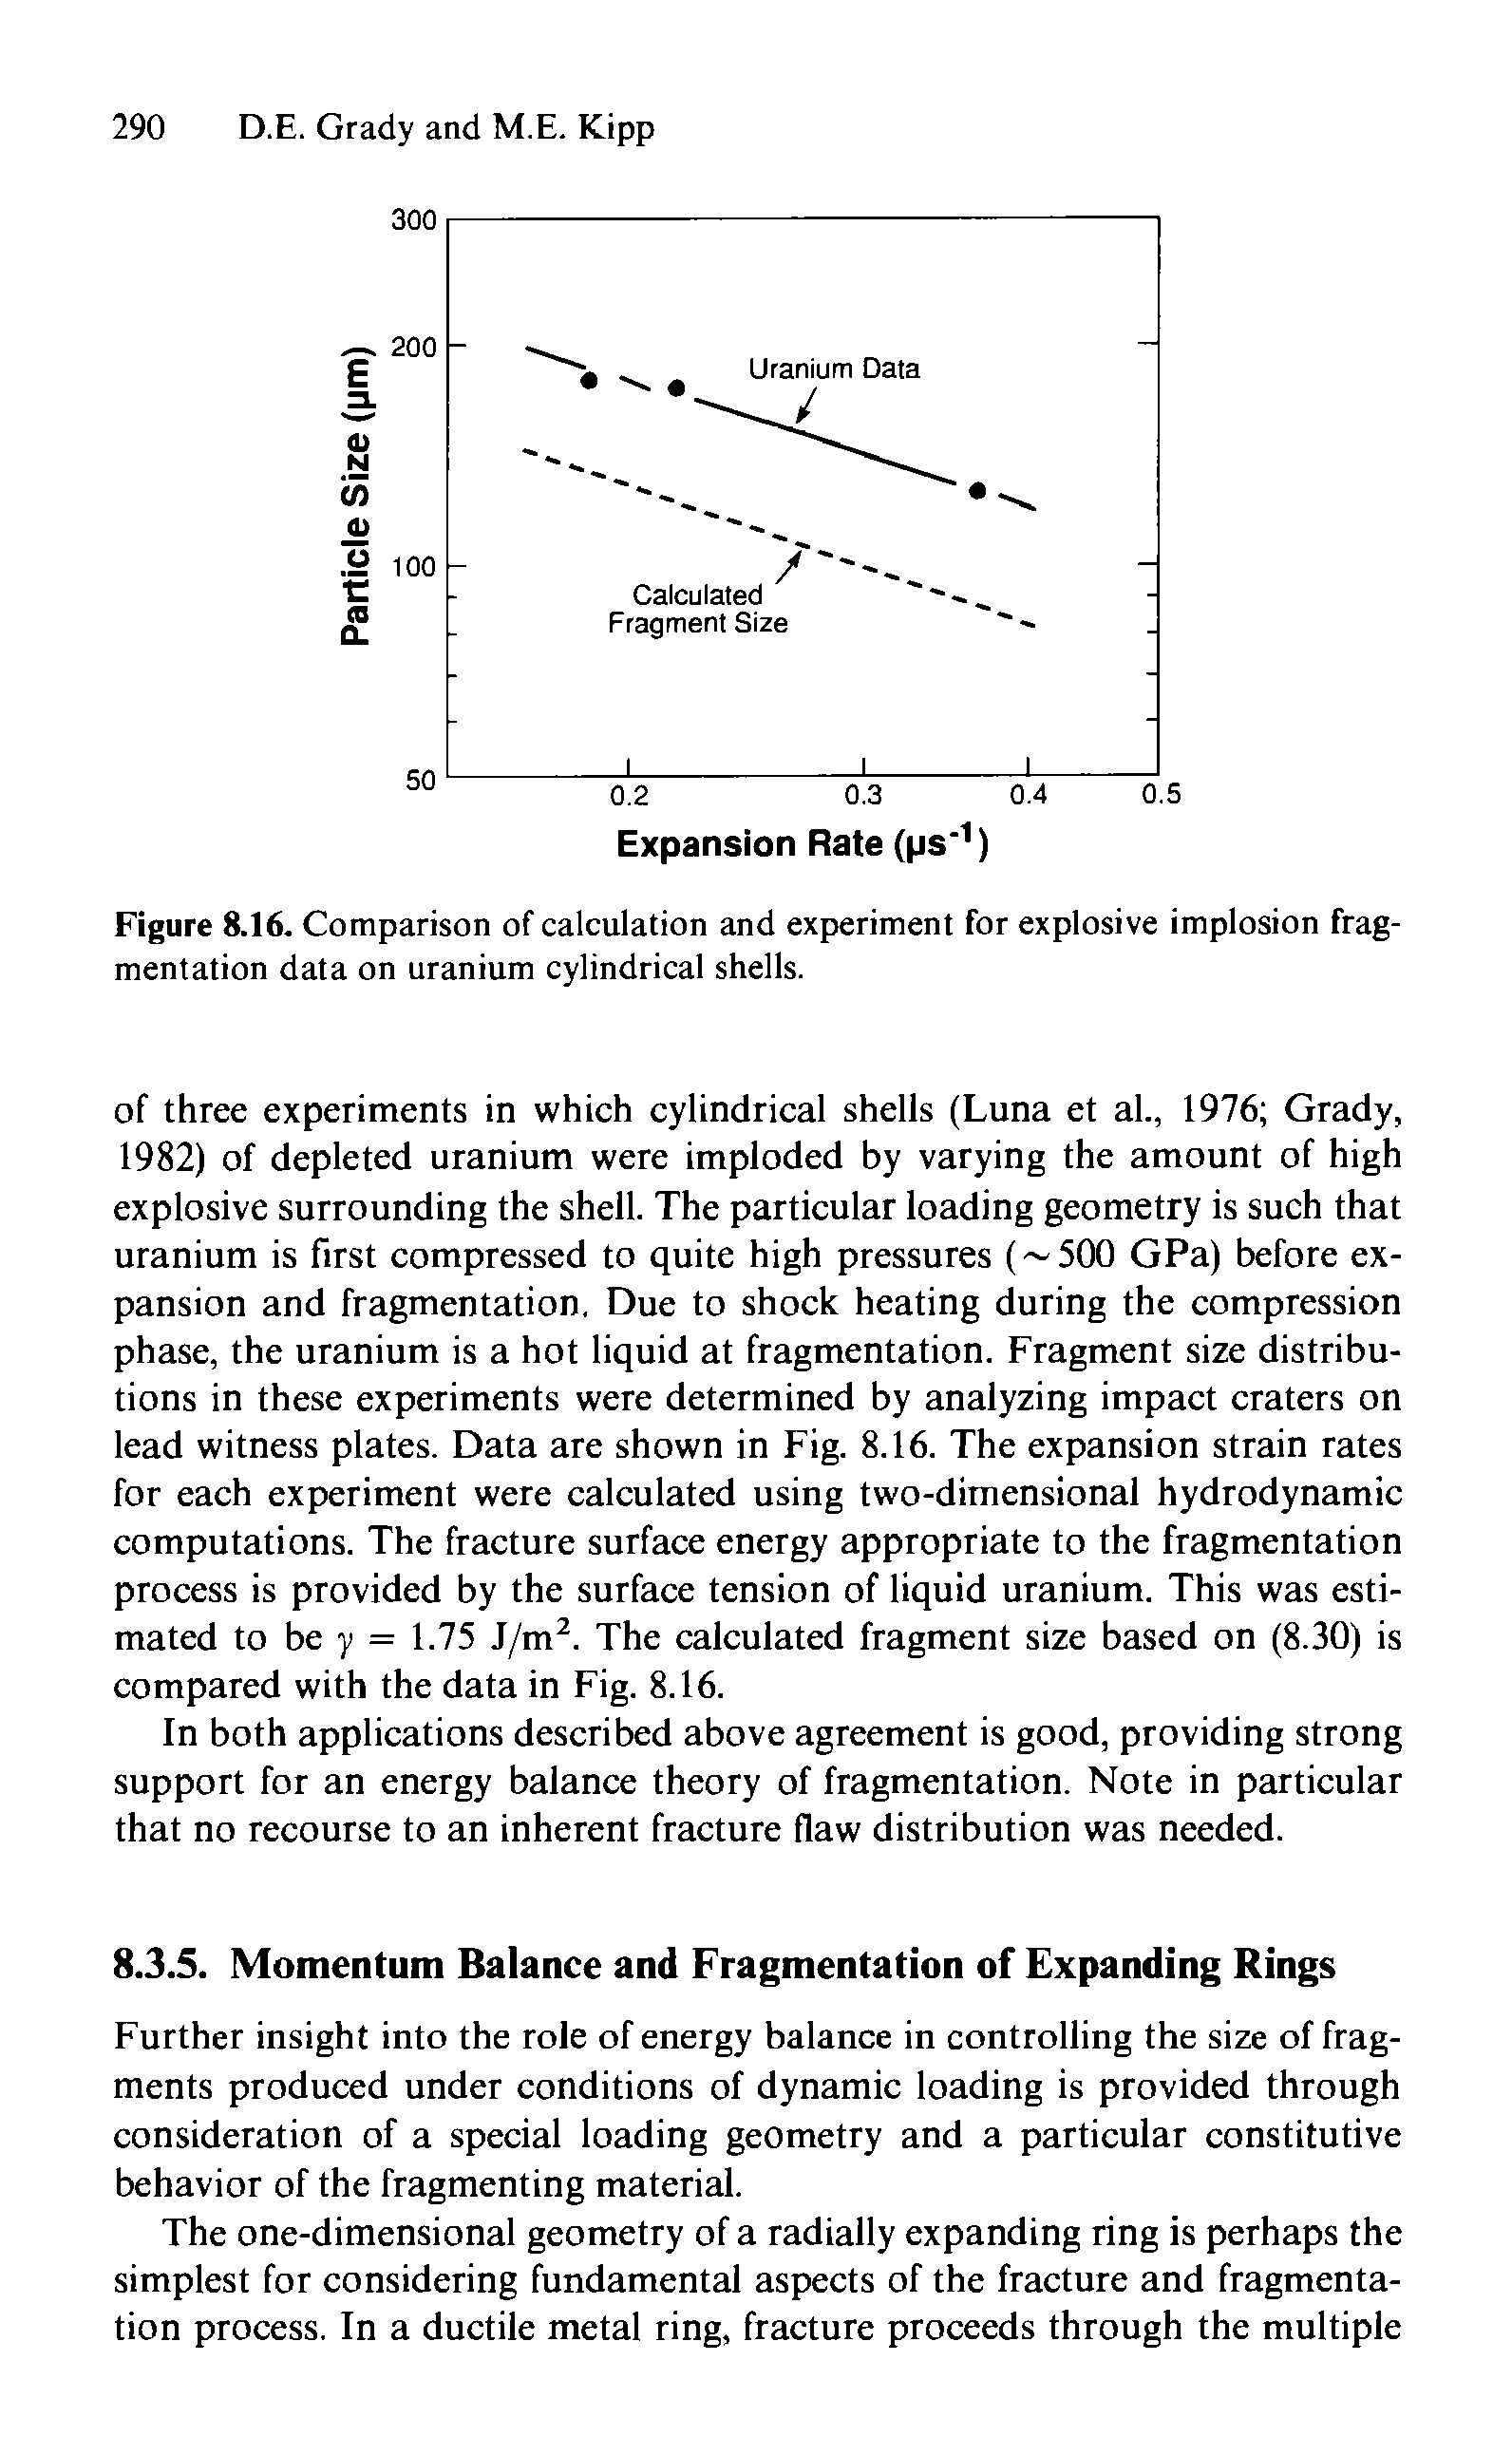 Figure 8.16. Comparison of calculation and experiment for explosive implosion fragmentation data on uranium cylindrical shells.